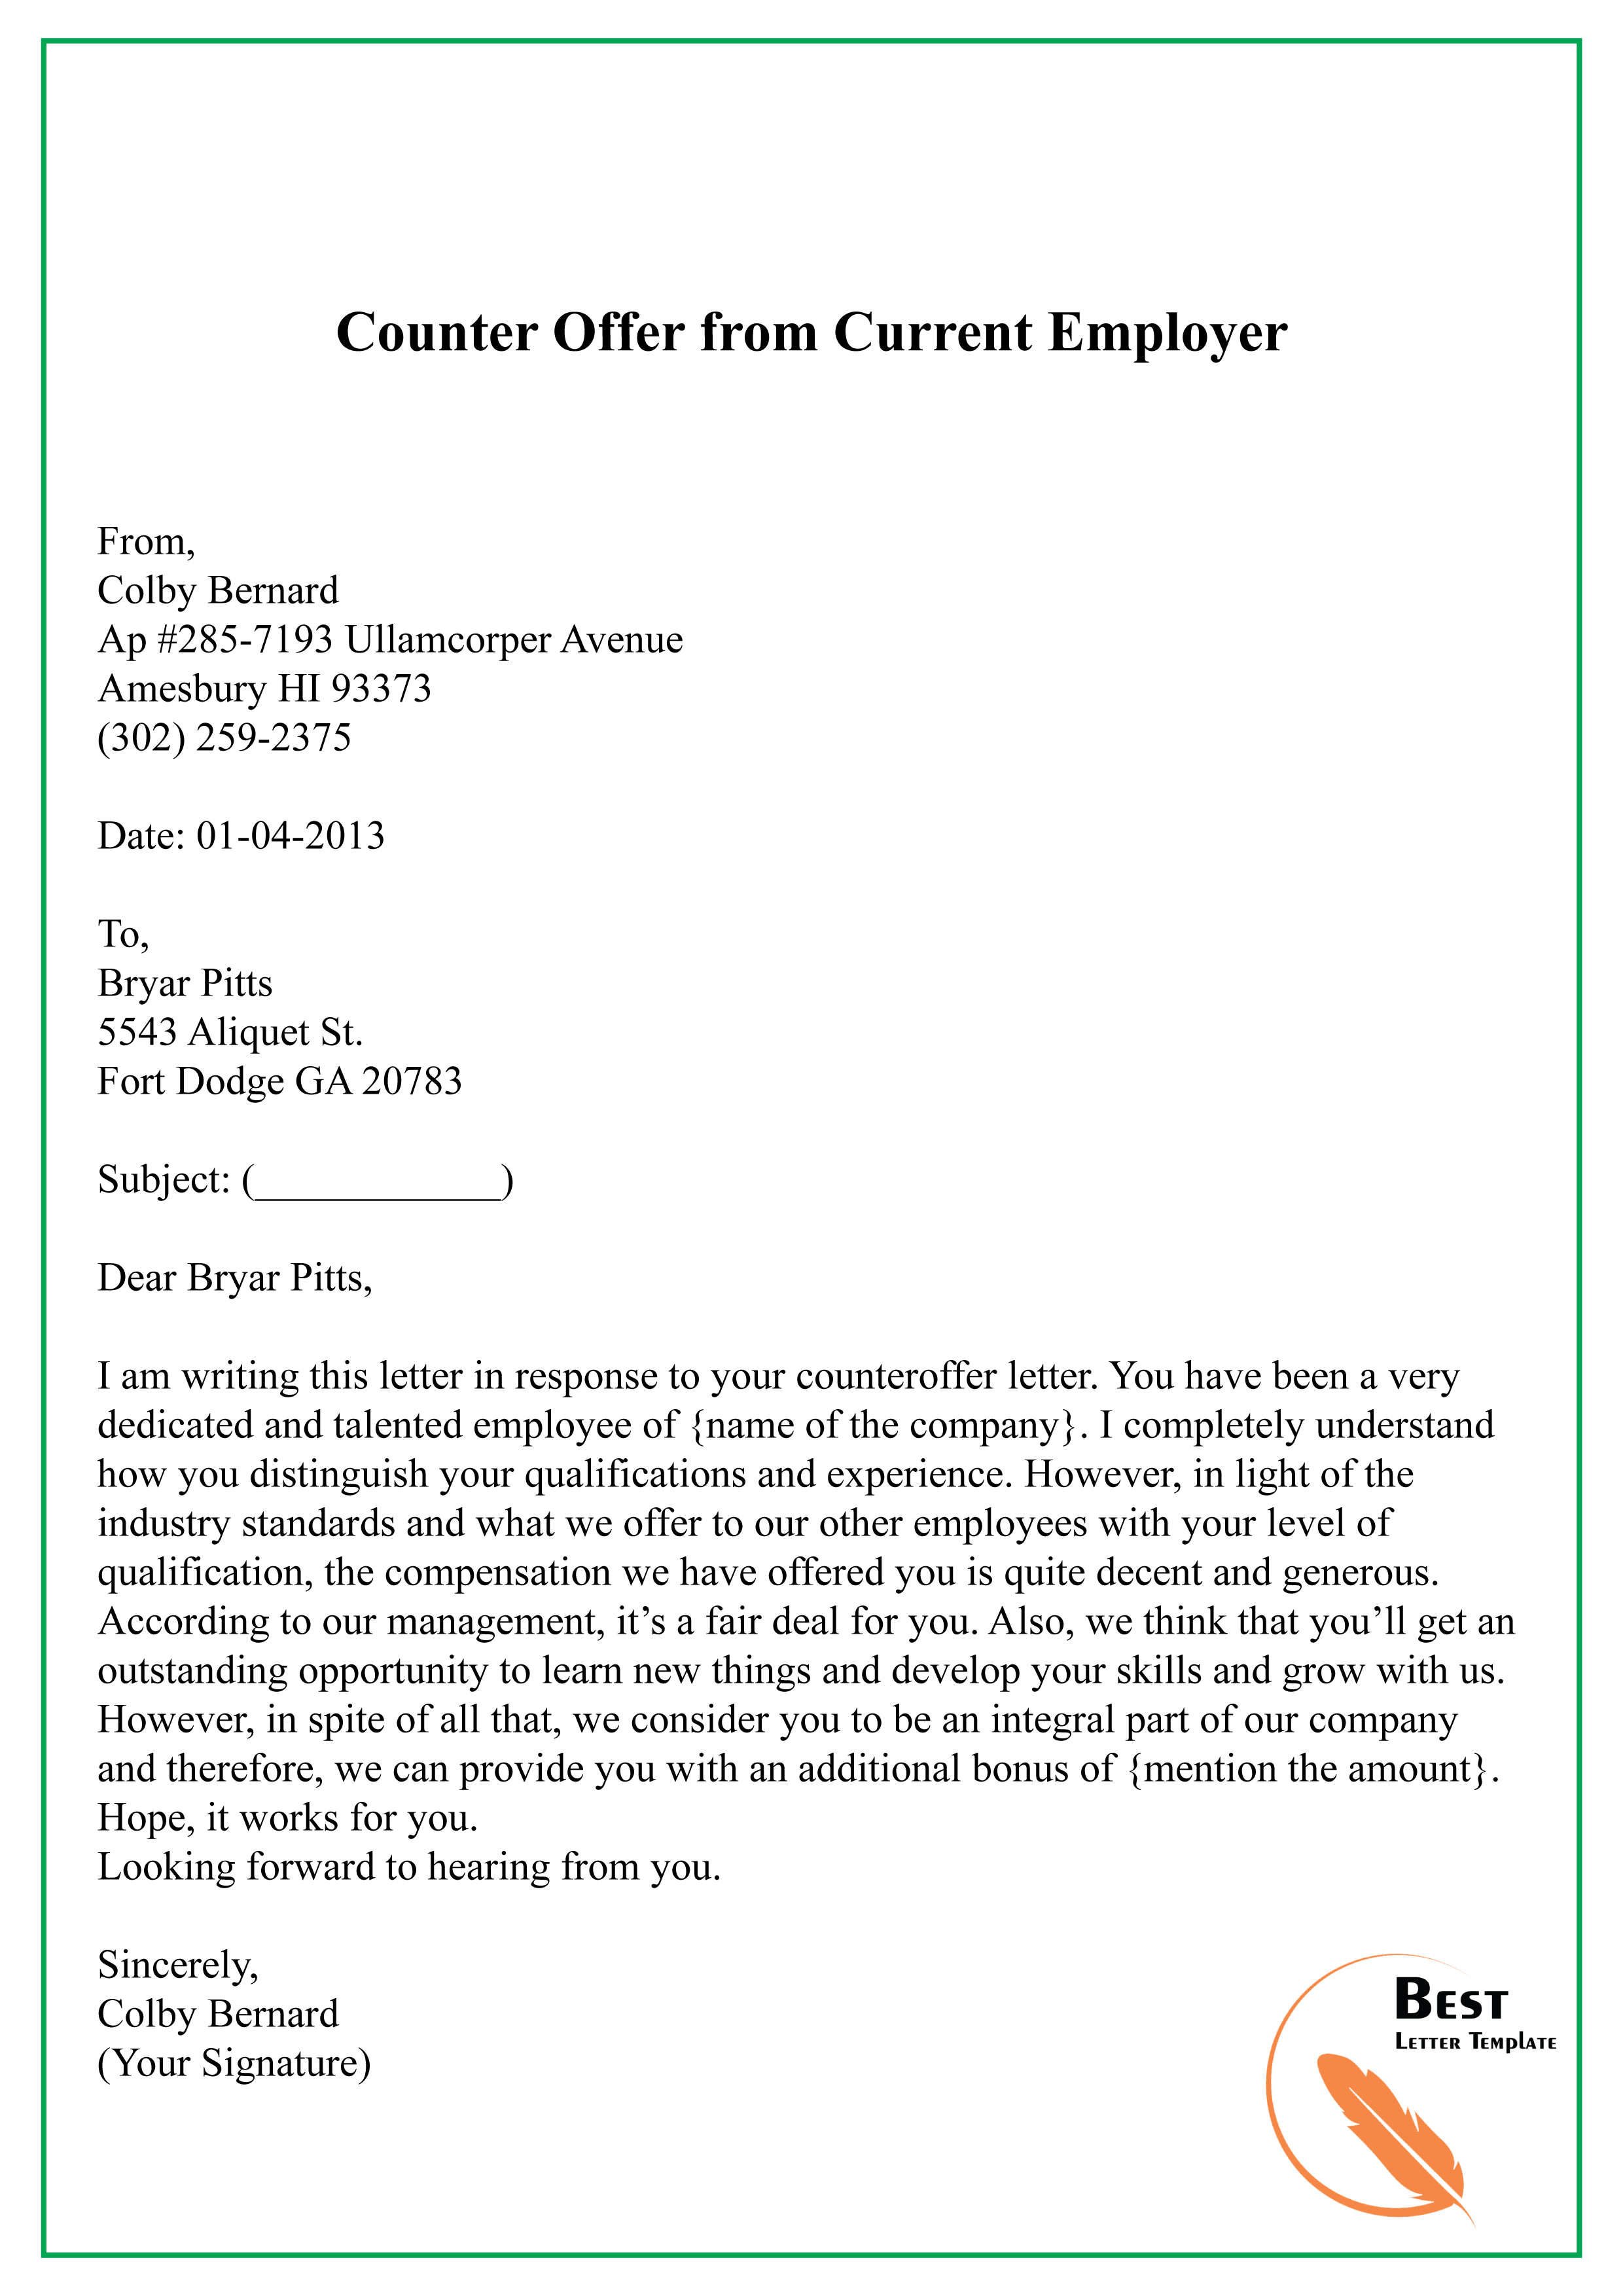 Counter Offer from Current Employer01 Best Letter Template